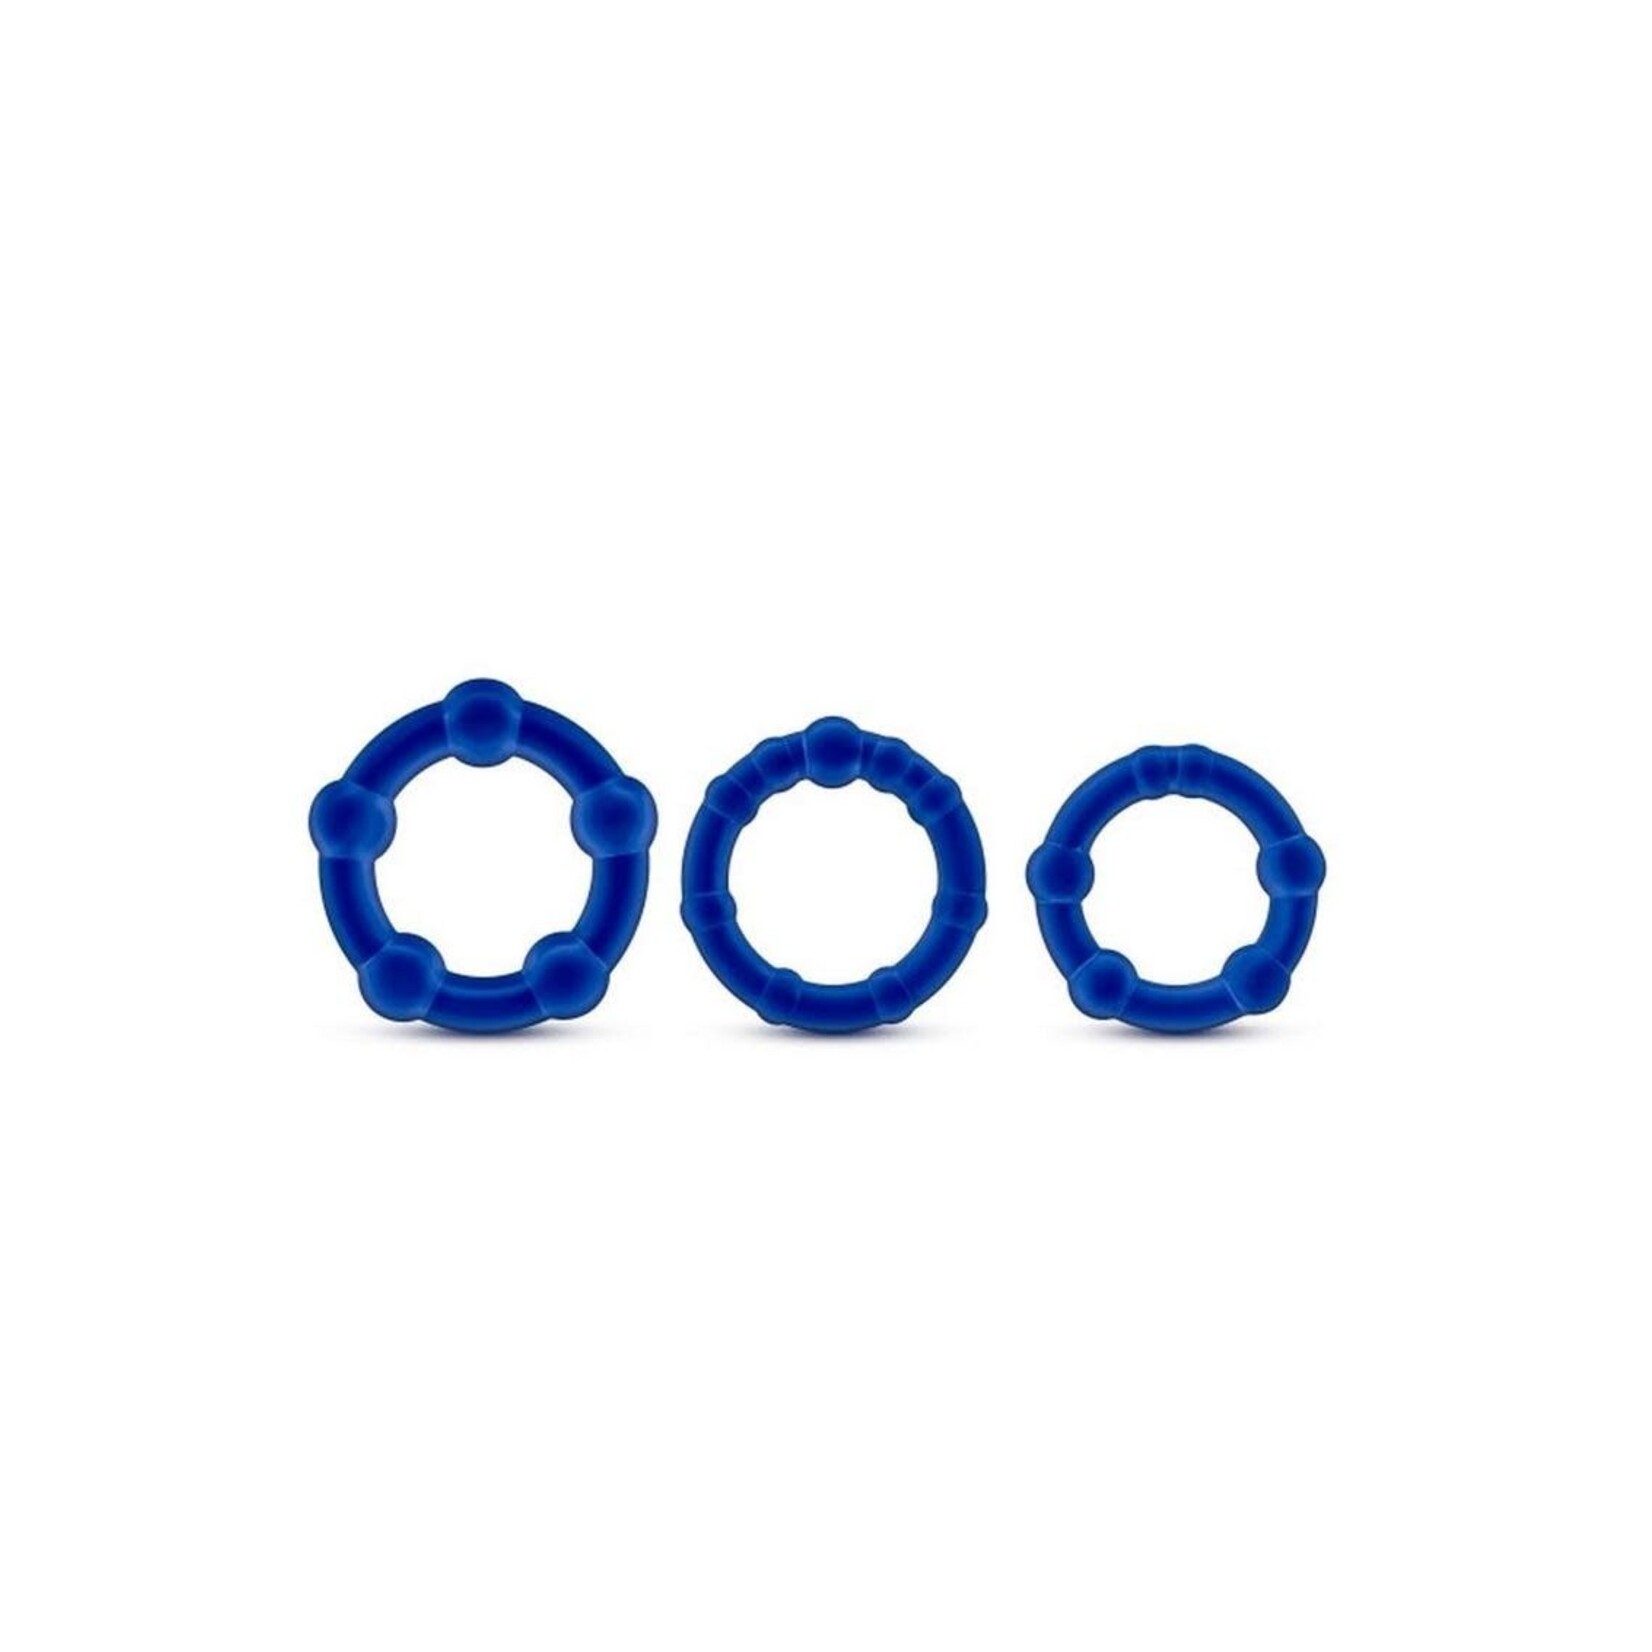 Stay Hard Beaded Cock Rings (3 Sizes) - Blue